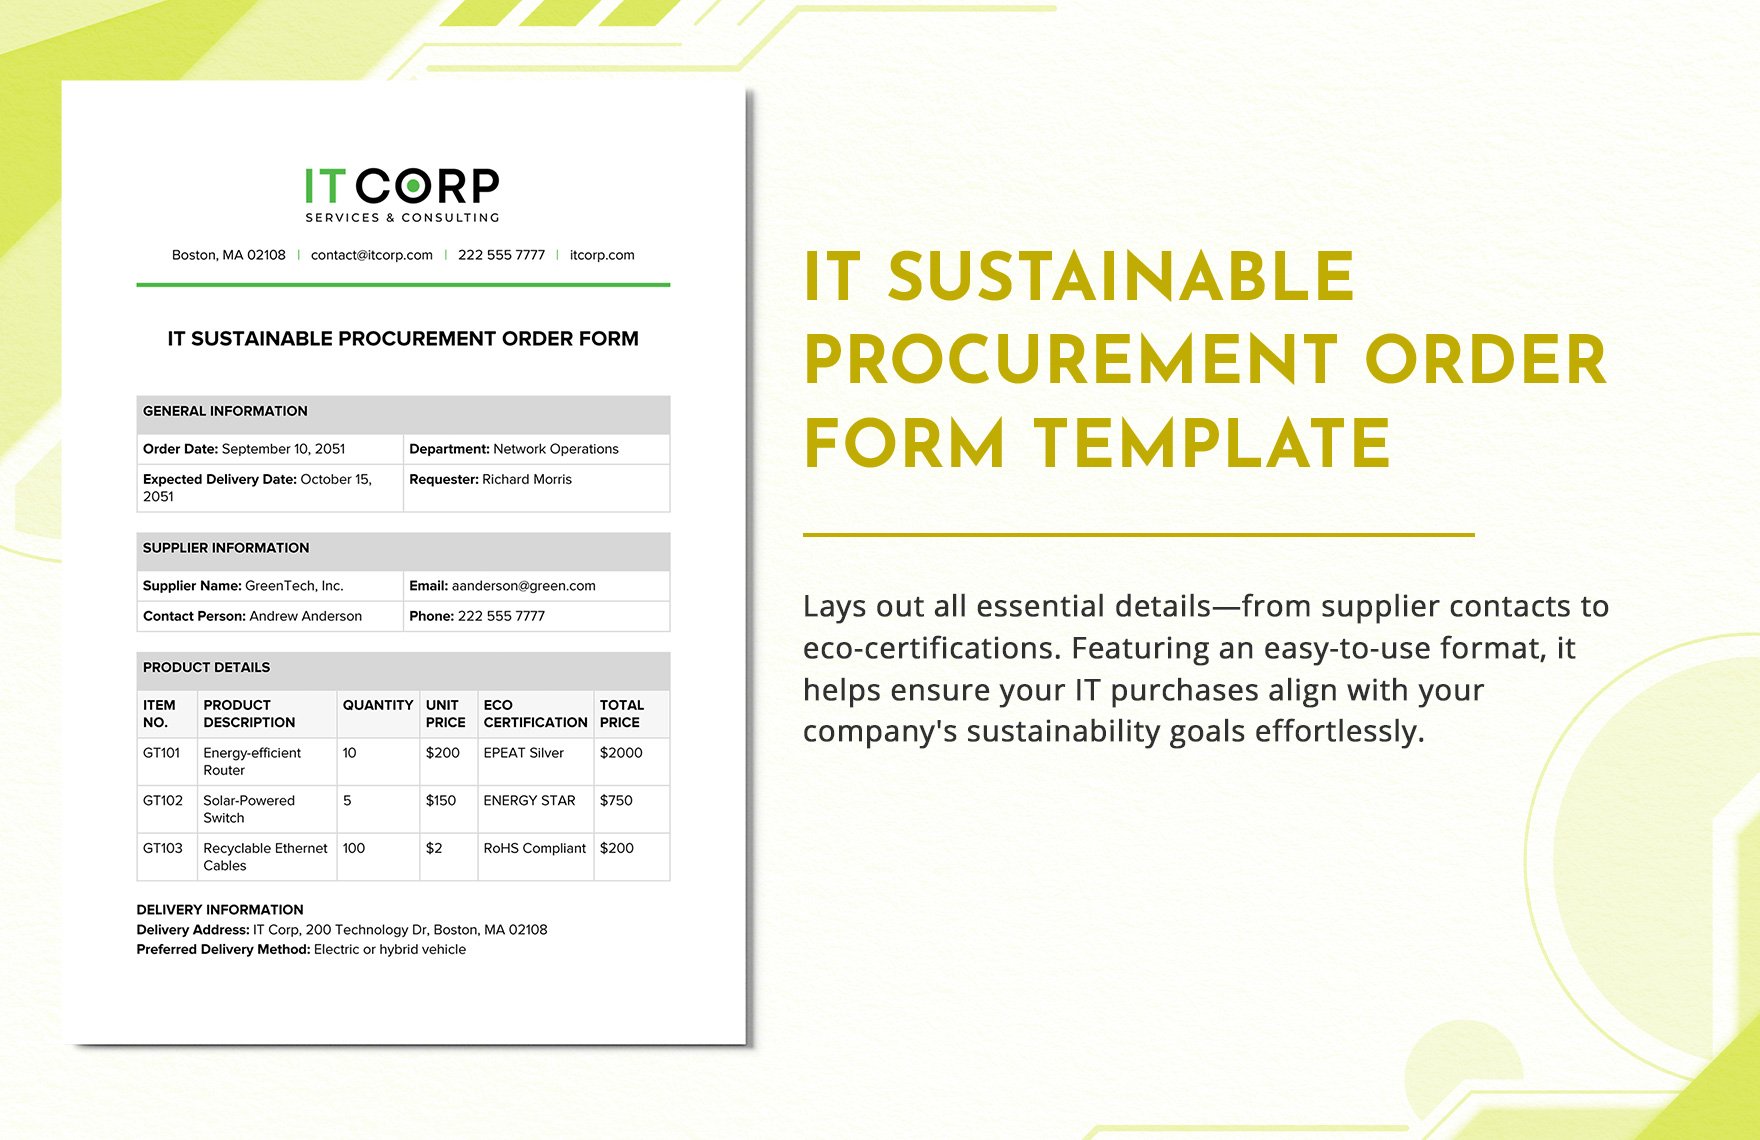 IT Sustainable Procurement Order Form Template